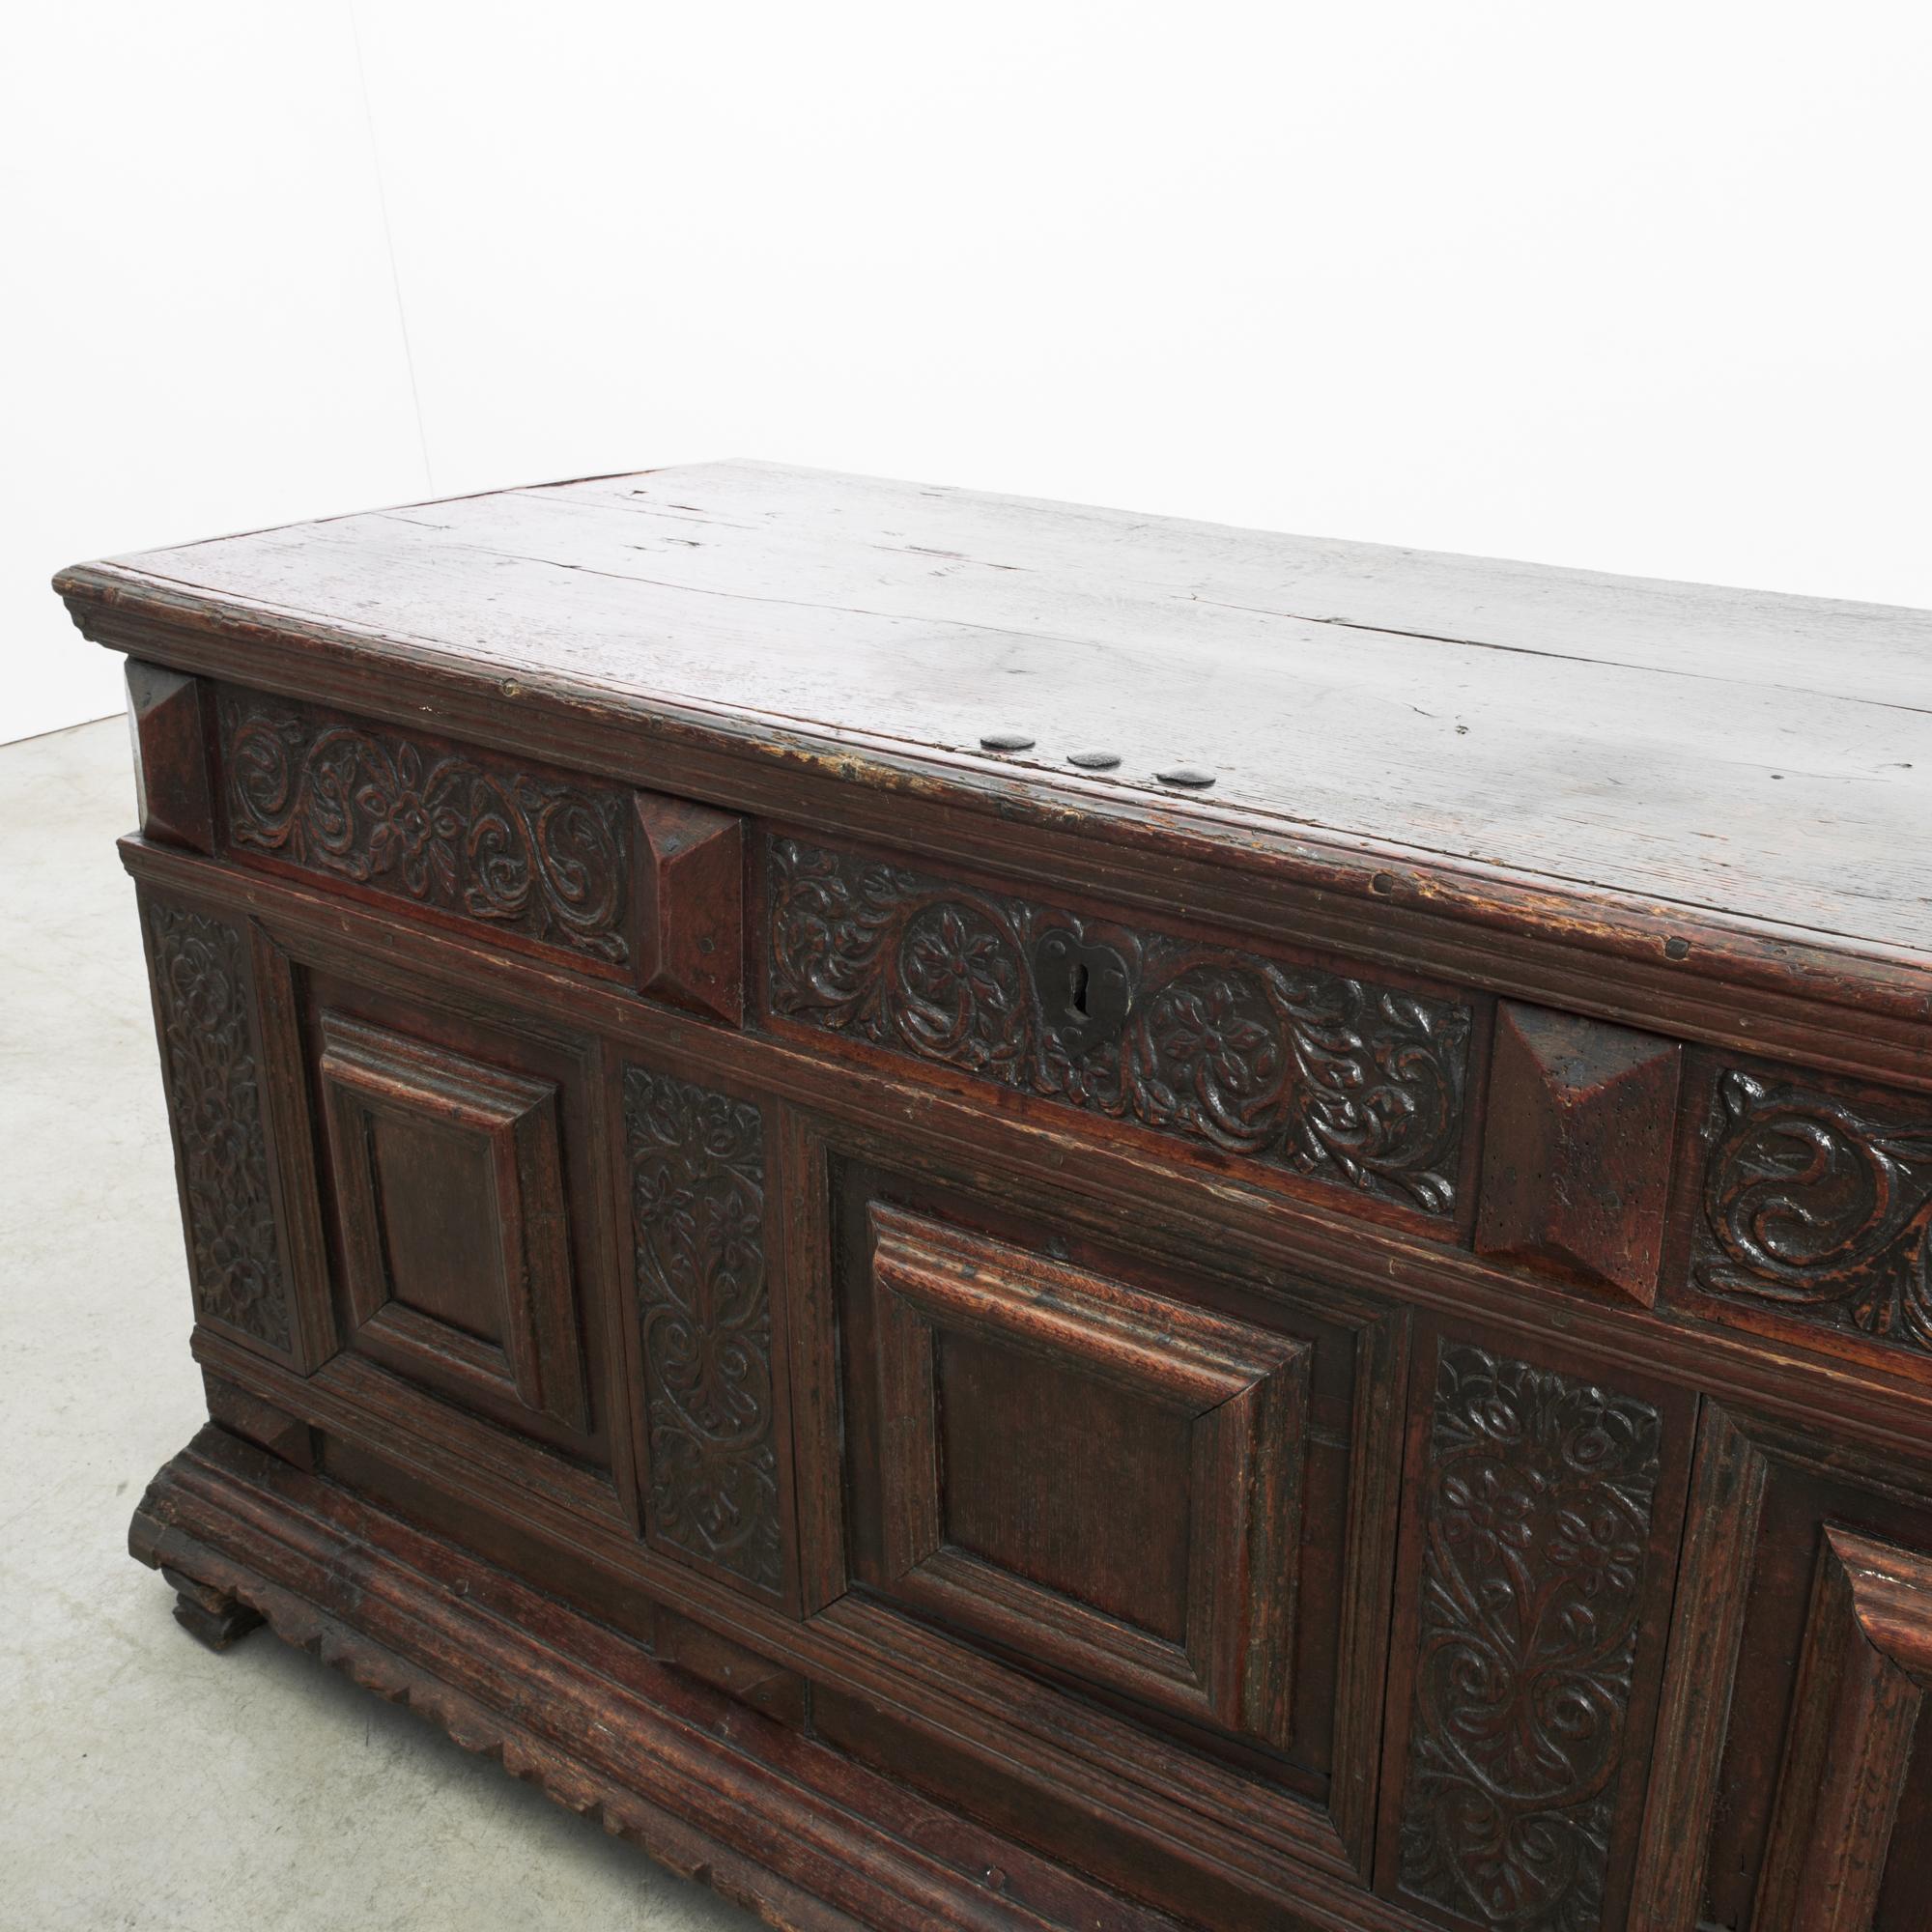 Hand-Carved 1720s German Wooden Trunk with Original Patina